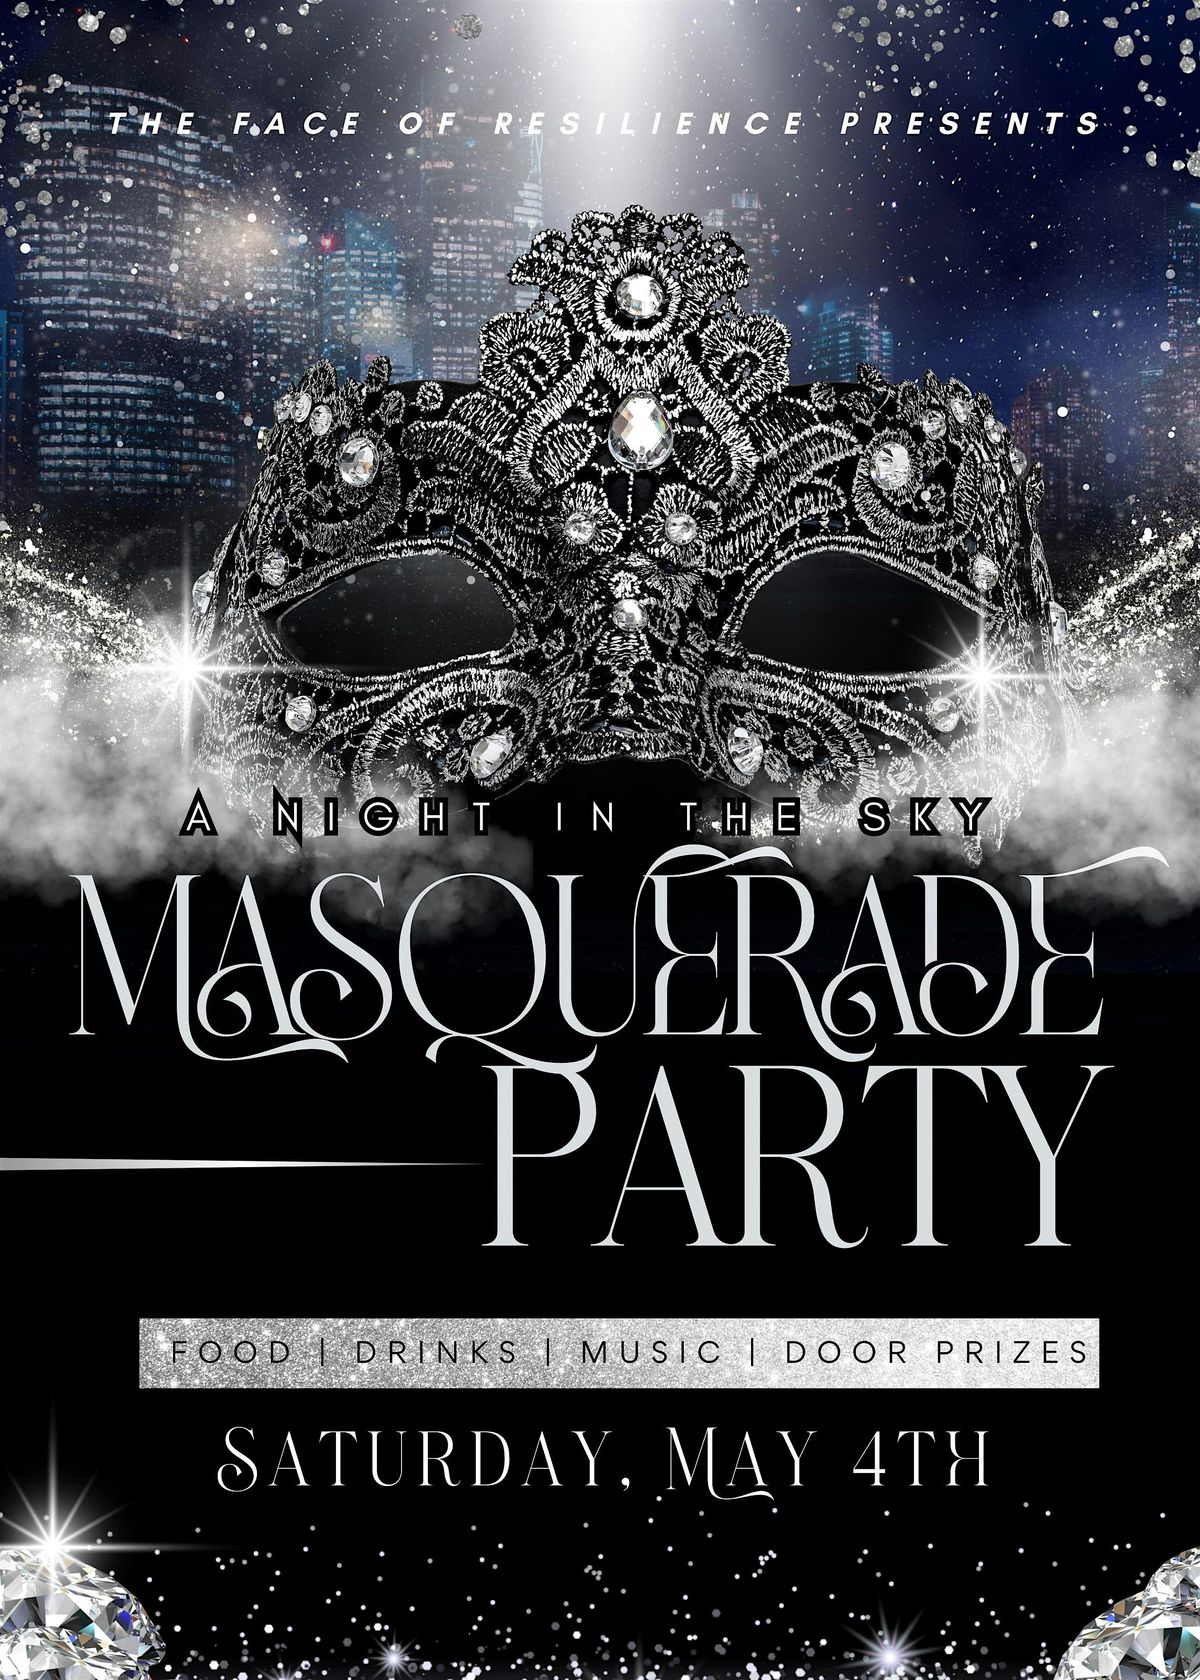 A Night In The Sky Masquerade Party